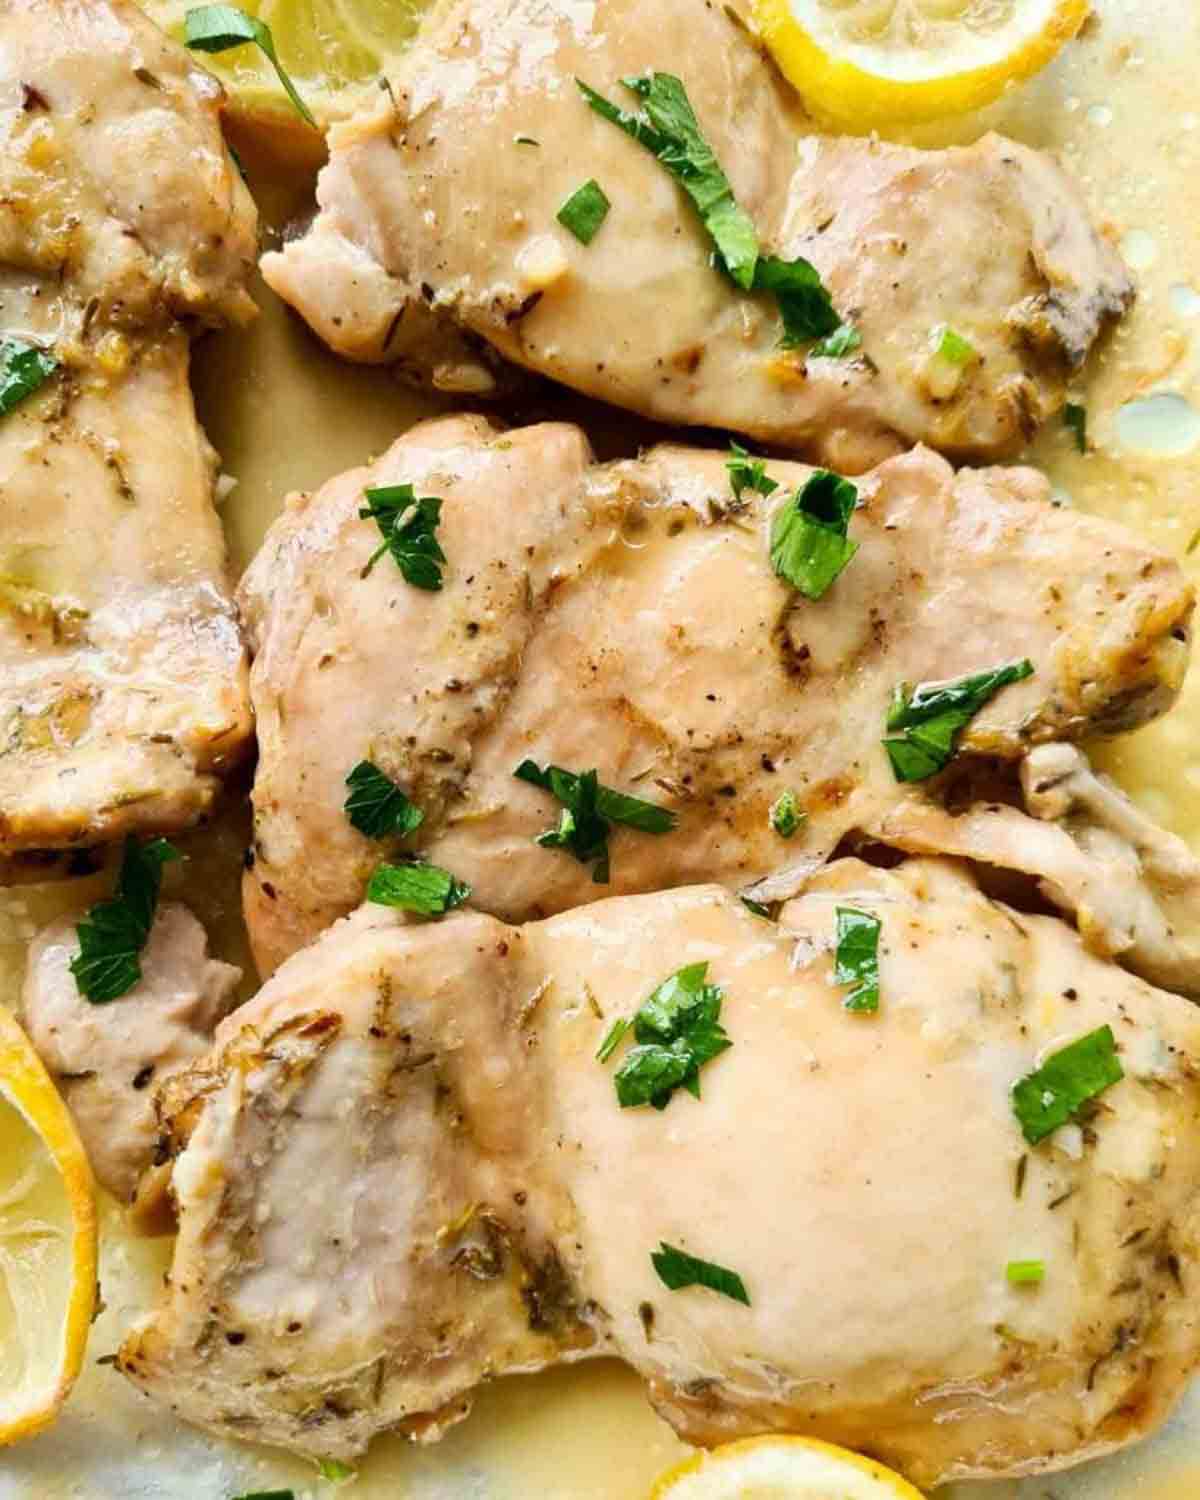 Oven baked lemon chicken thighs in a pile.